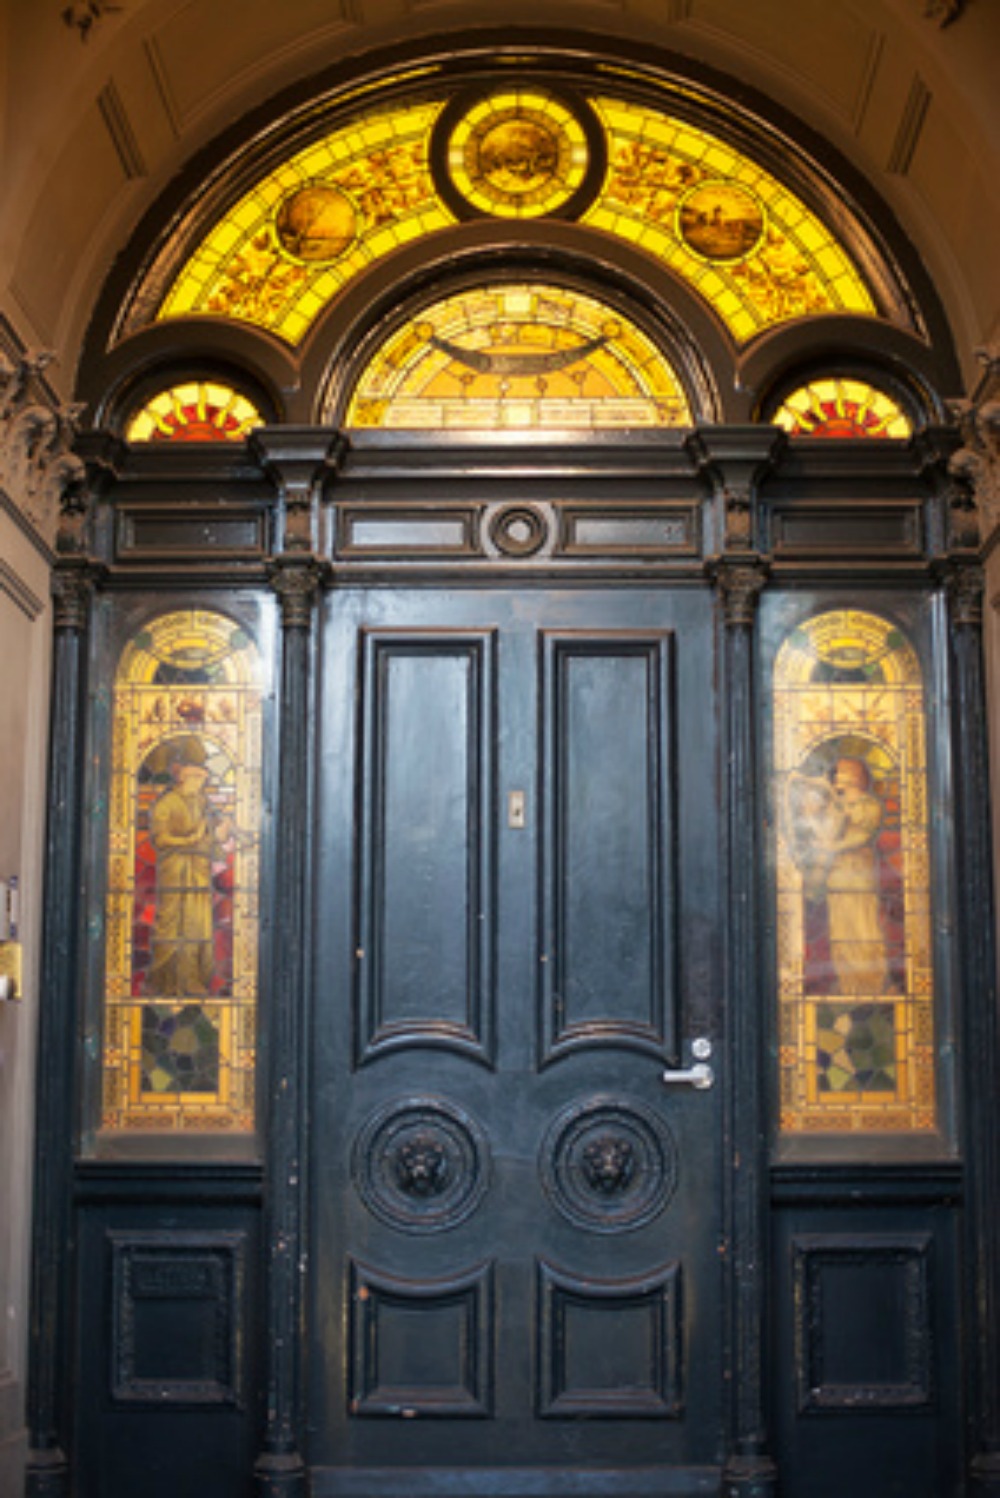 Ornate gothic doorway with stained glass overlays